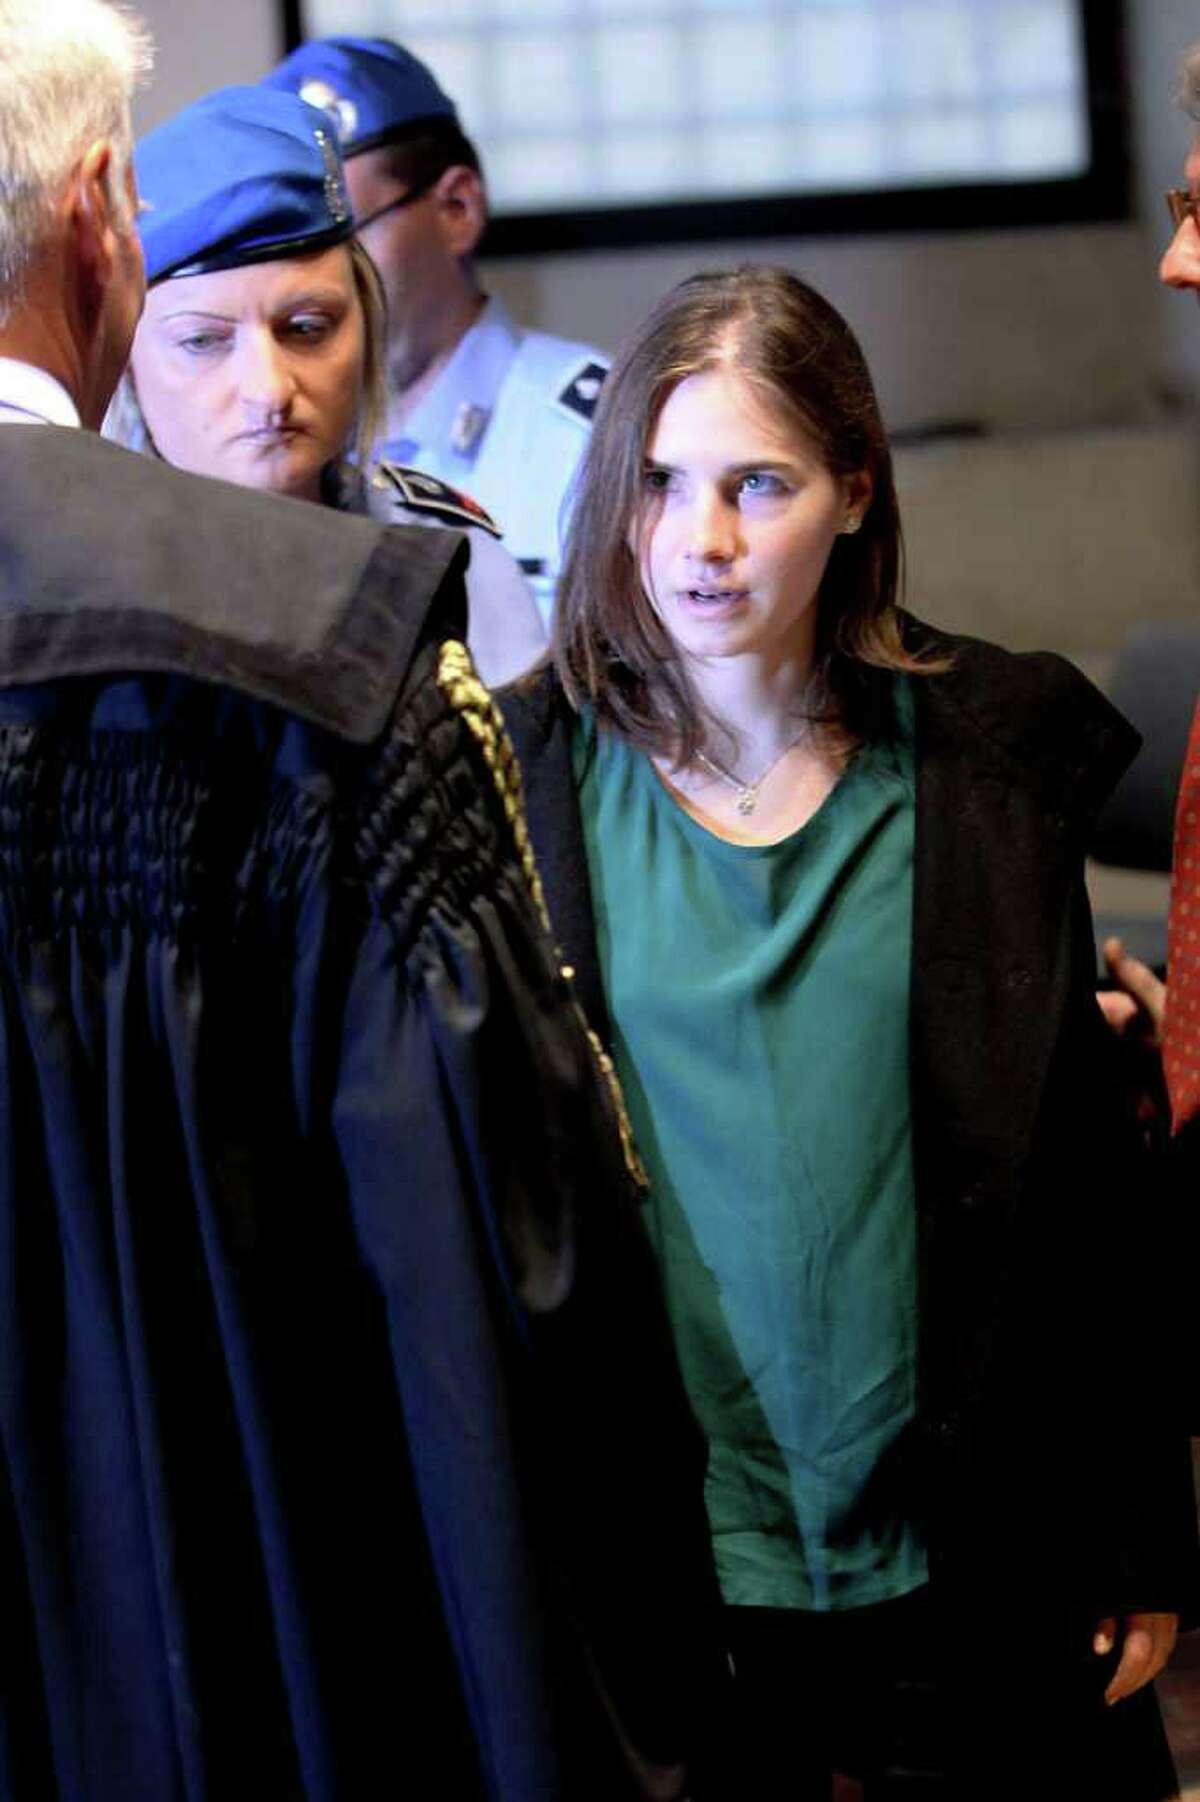 Amanda Knox arrives at Perugia's Court of Appeal the day of the verdict in her and Raffaele Sollecito's appeal of their murder convictions in Perugia, Italy.